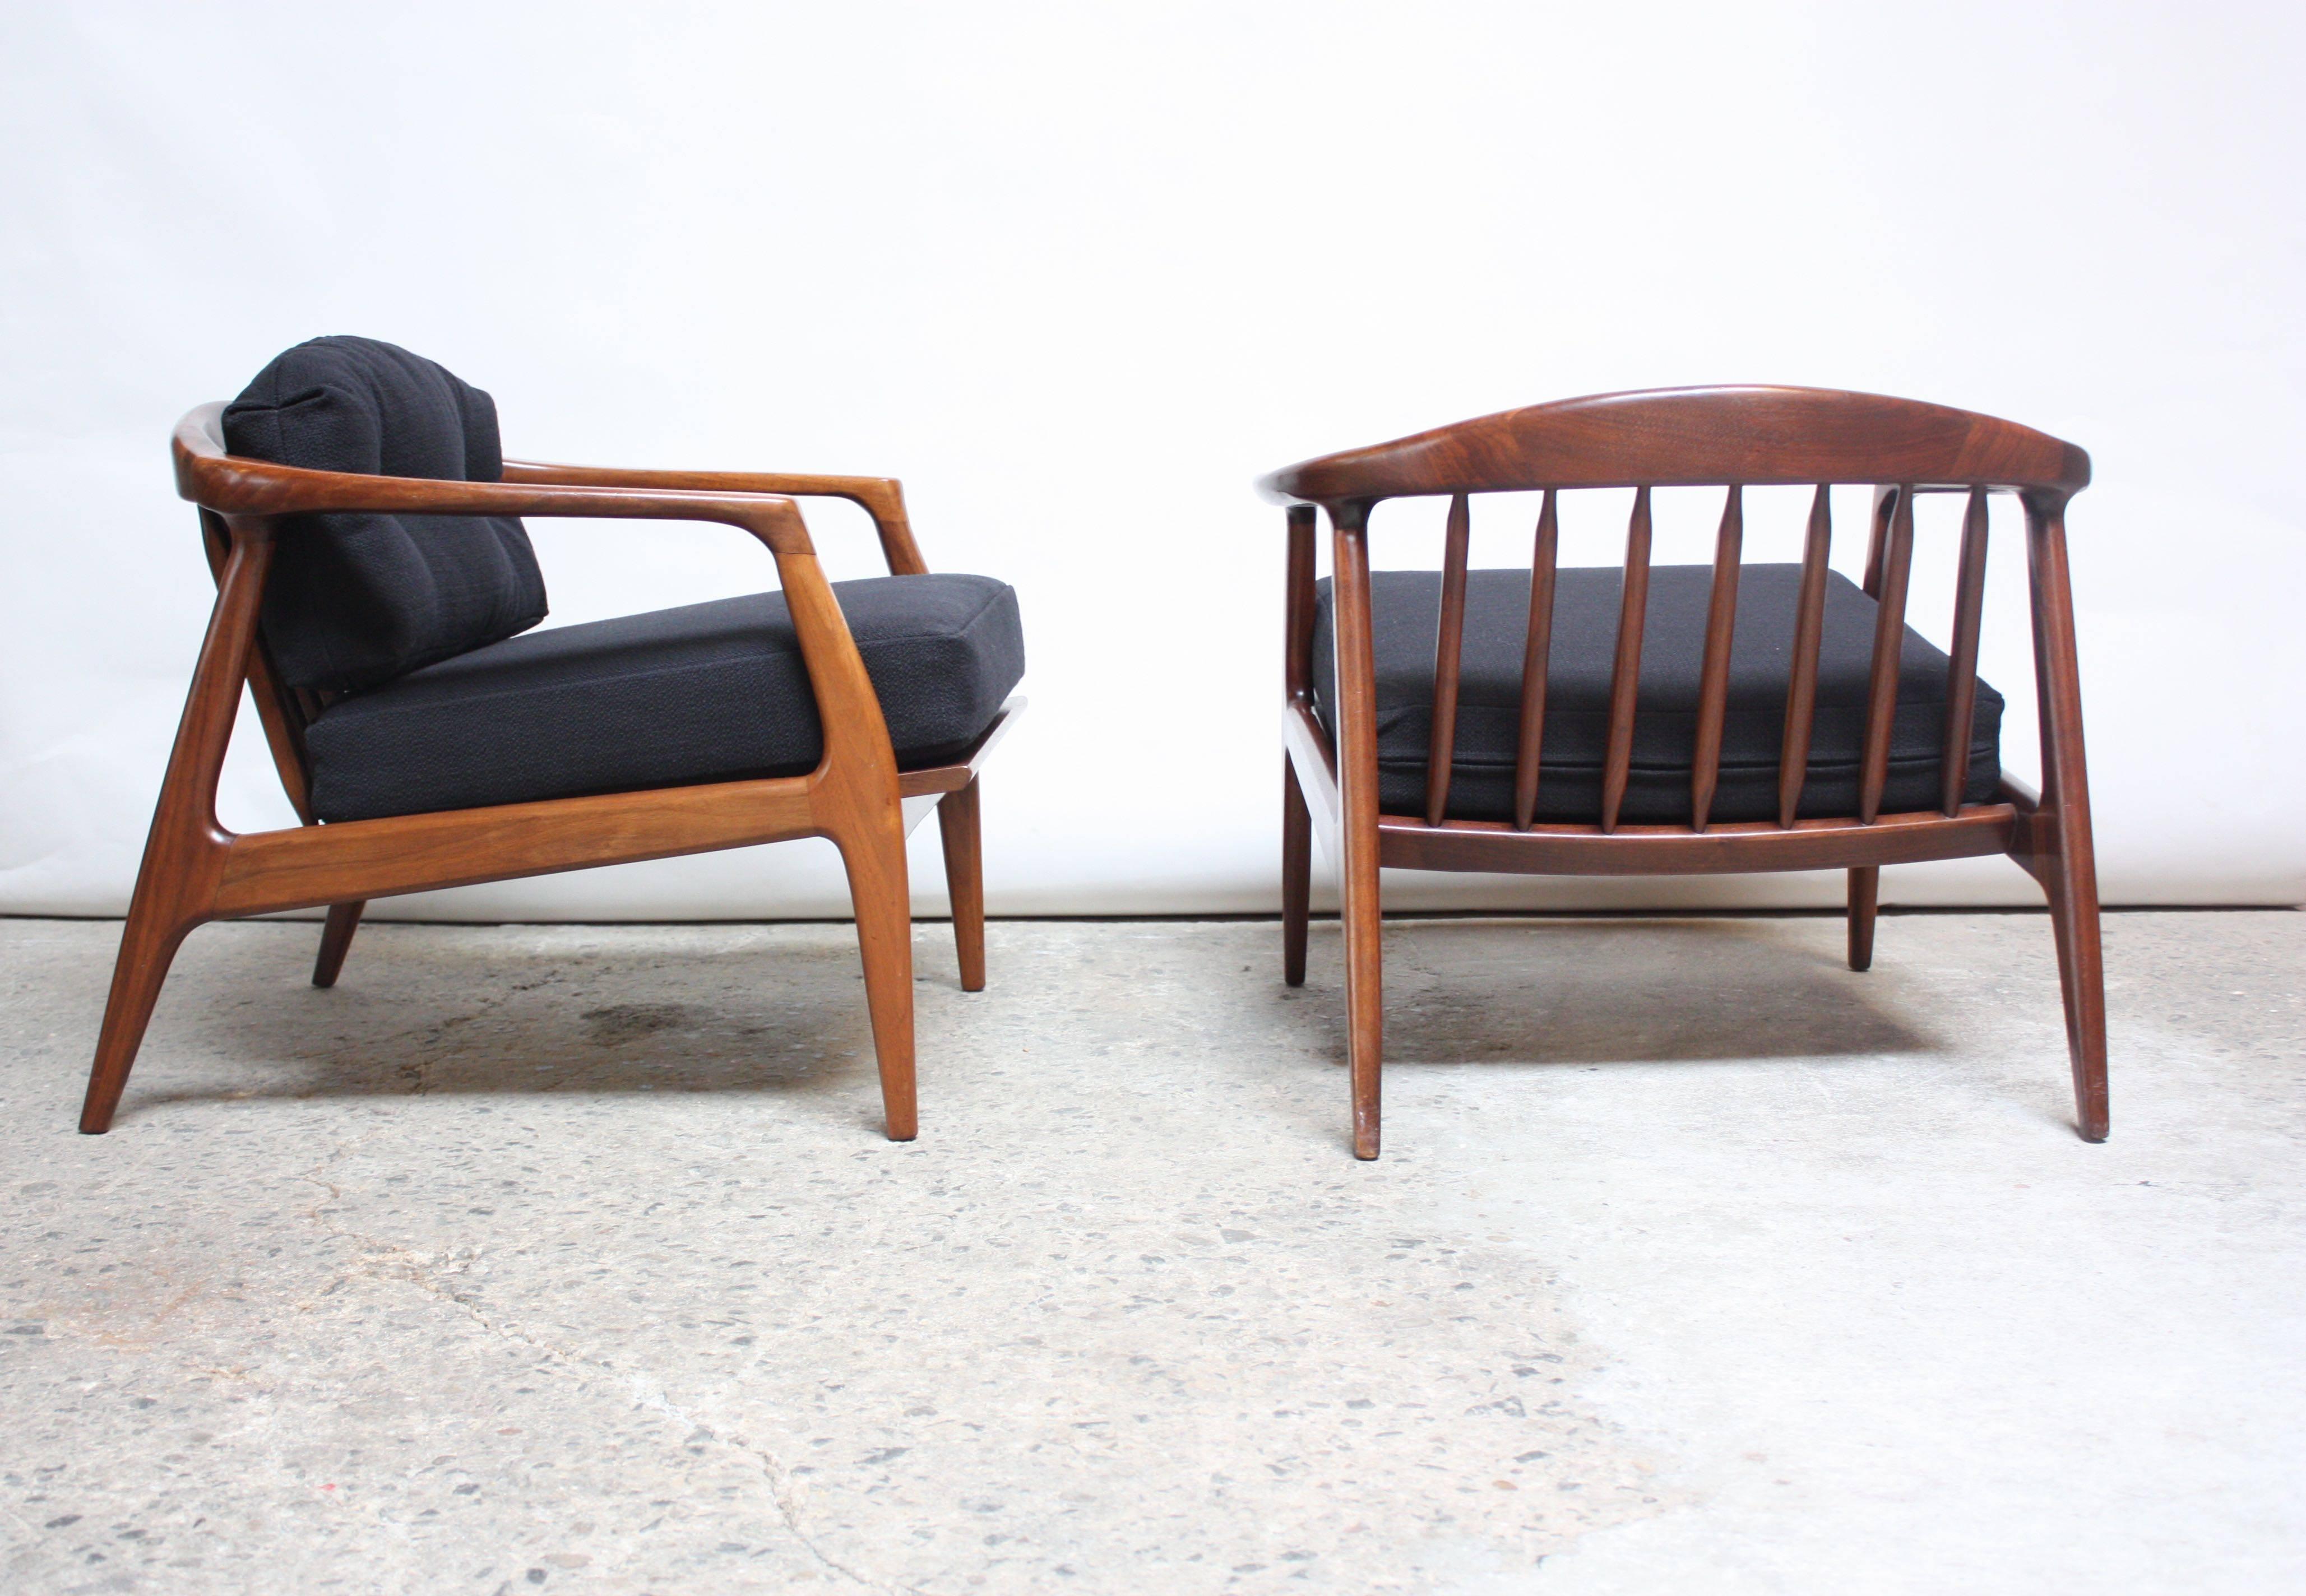 Mid-20th Century Pair of Sculptural Walnut Lounge Chairs by Milo Baughman for Thayer Coggin